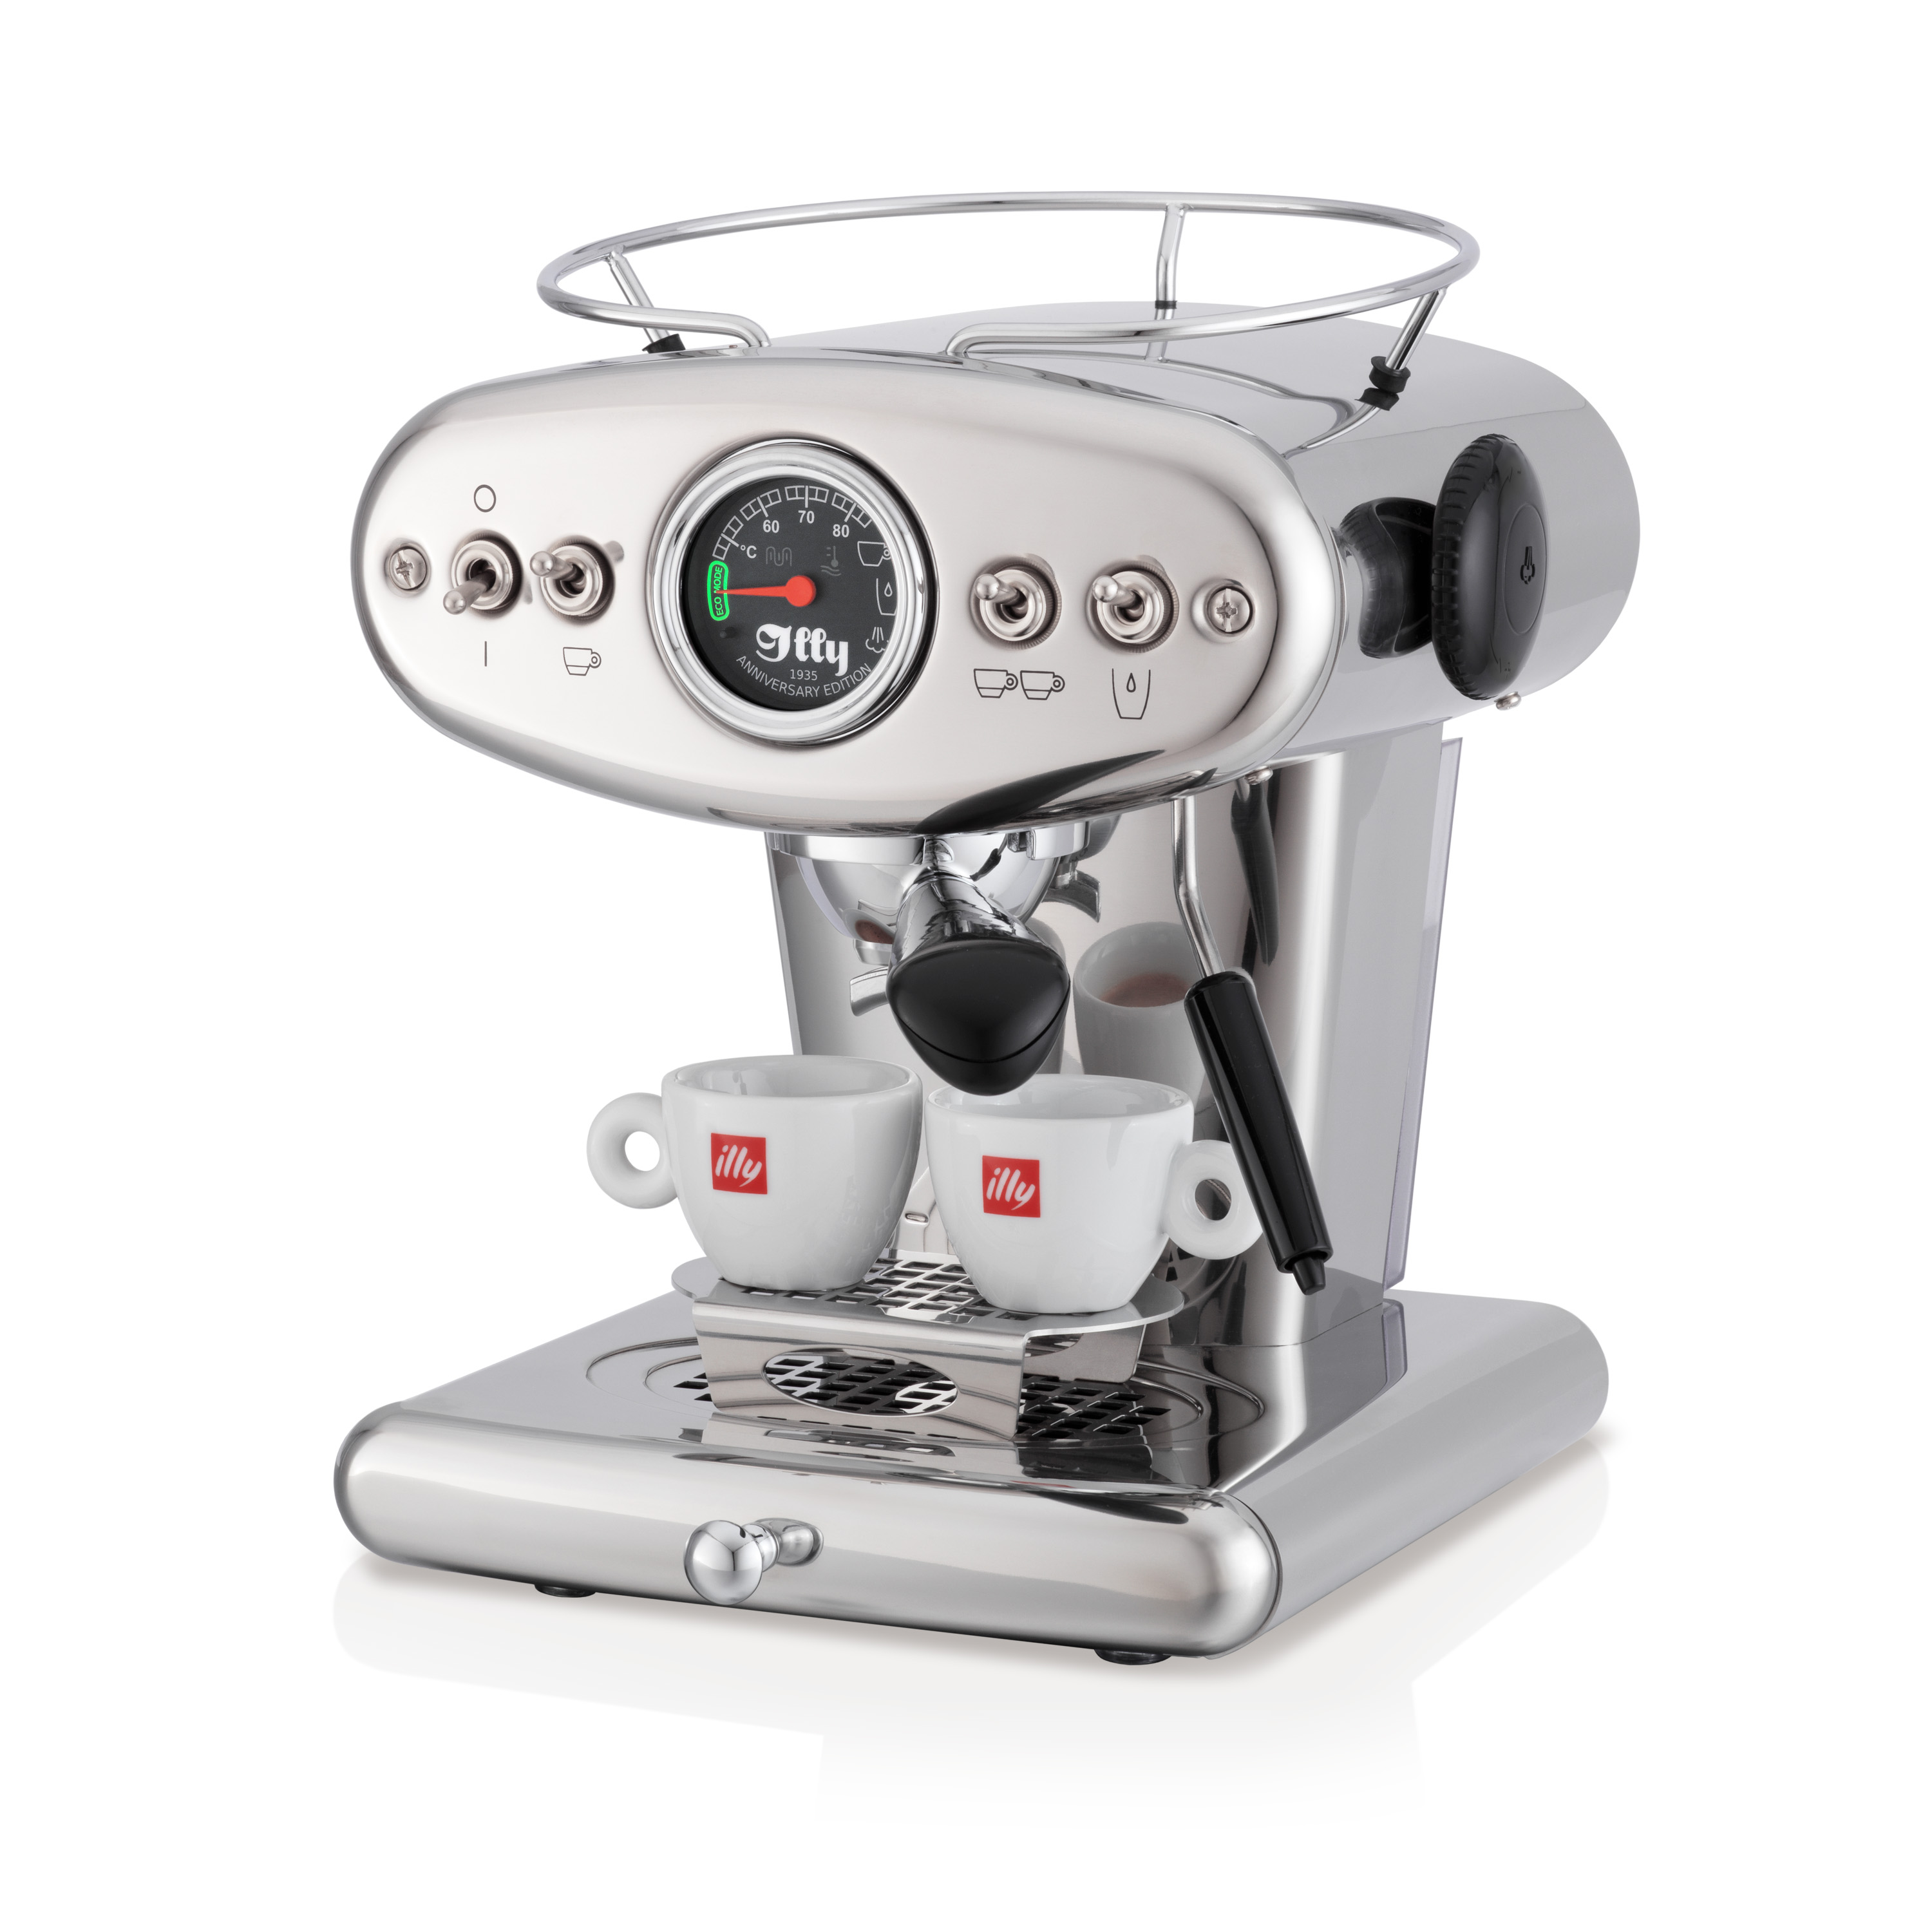 Ground Coffee Machines and Coffee Makers - illy